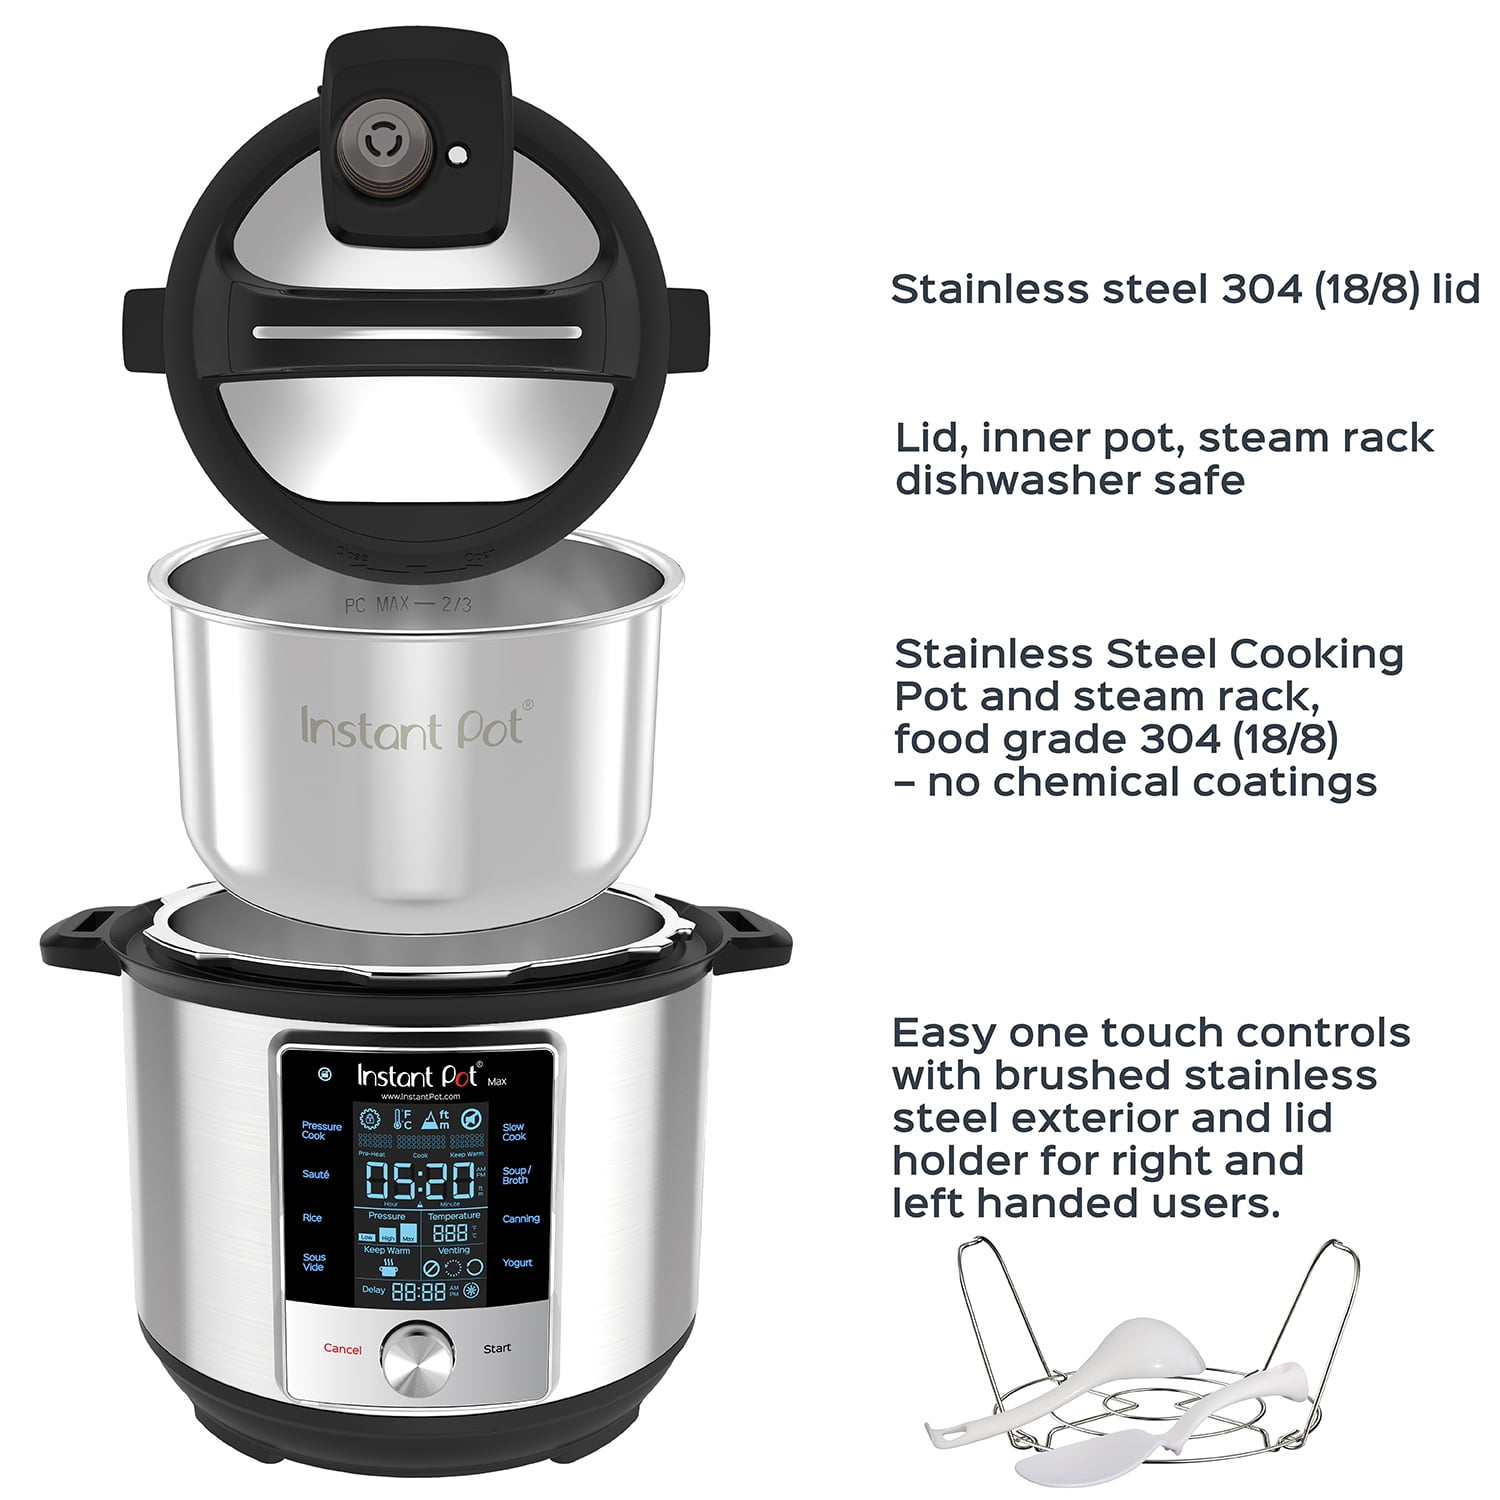 Instant Pot 6QT Essential, New Launch 2023, Stainless Steel 9-in-1 Ele -  KITCHEN MART